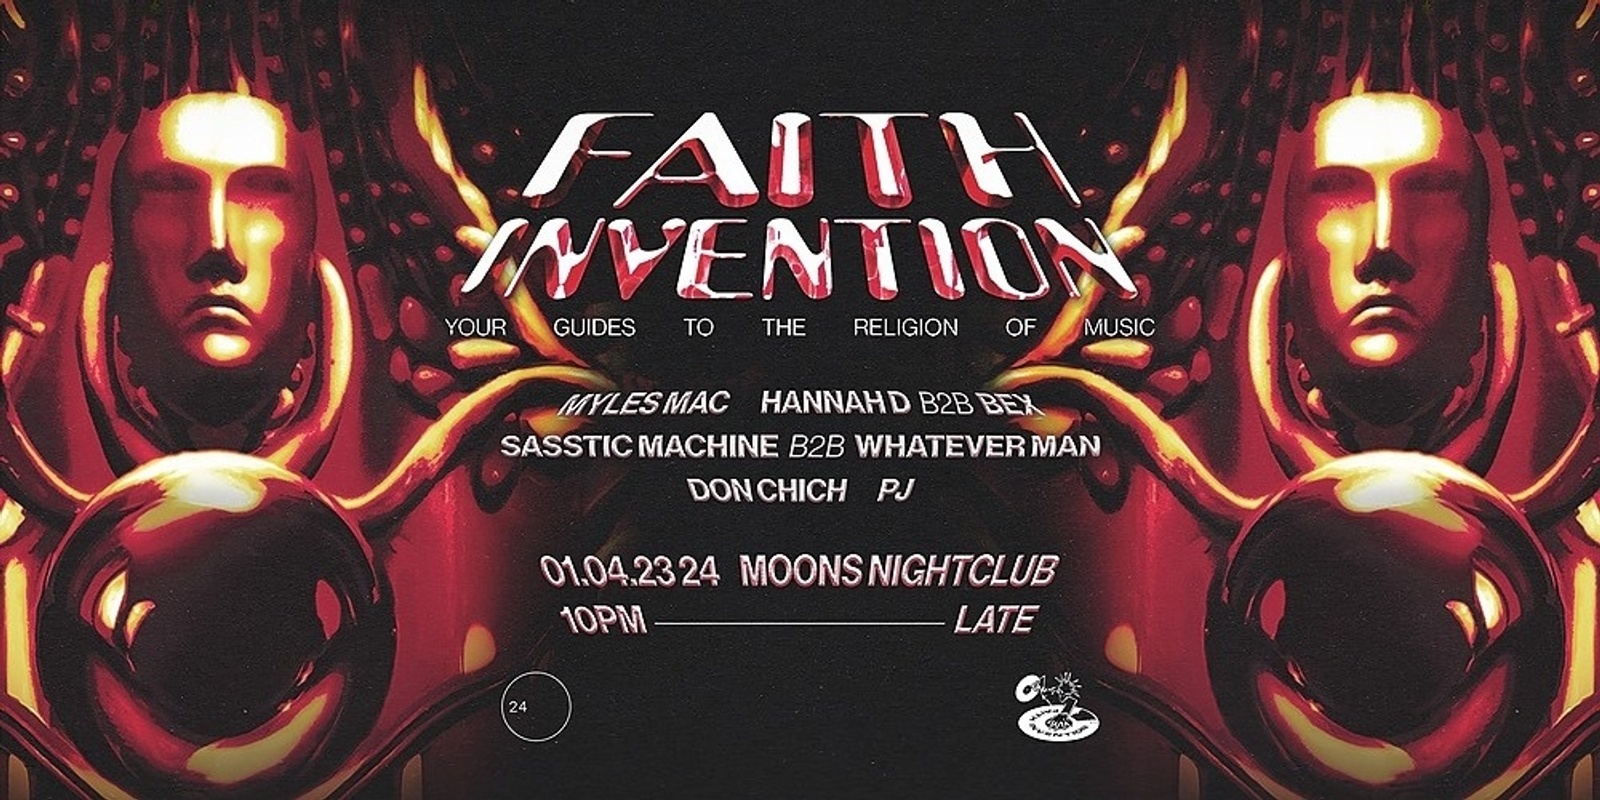 Faith Invention: Your Guides To The Religion Of Music